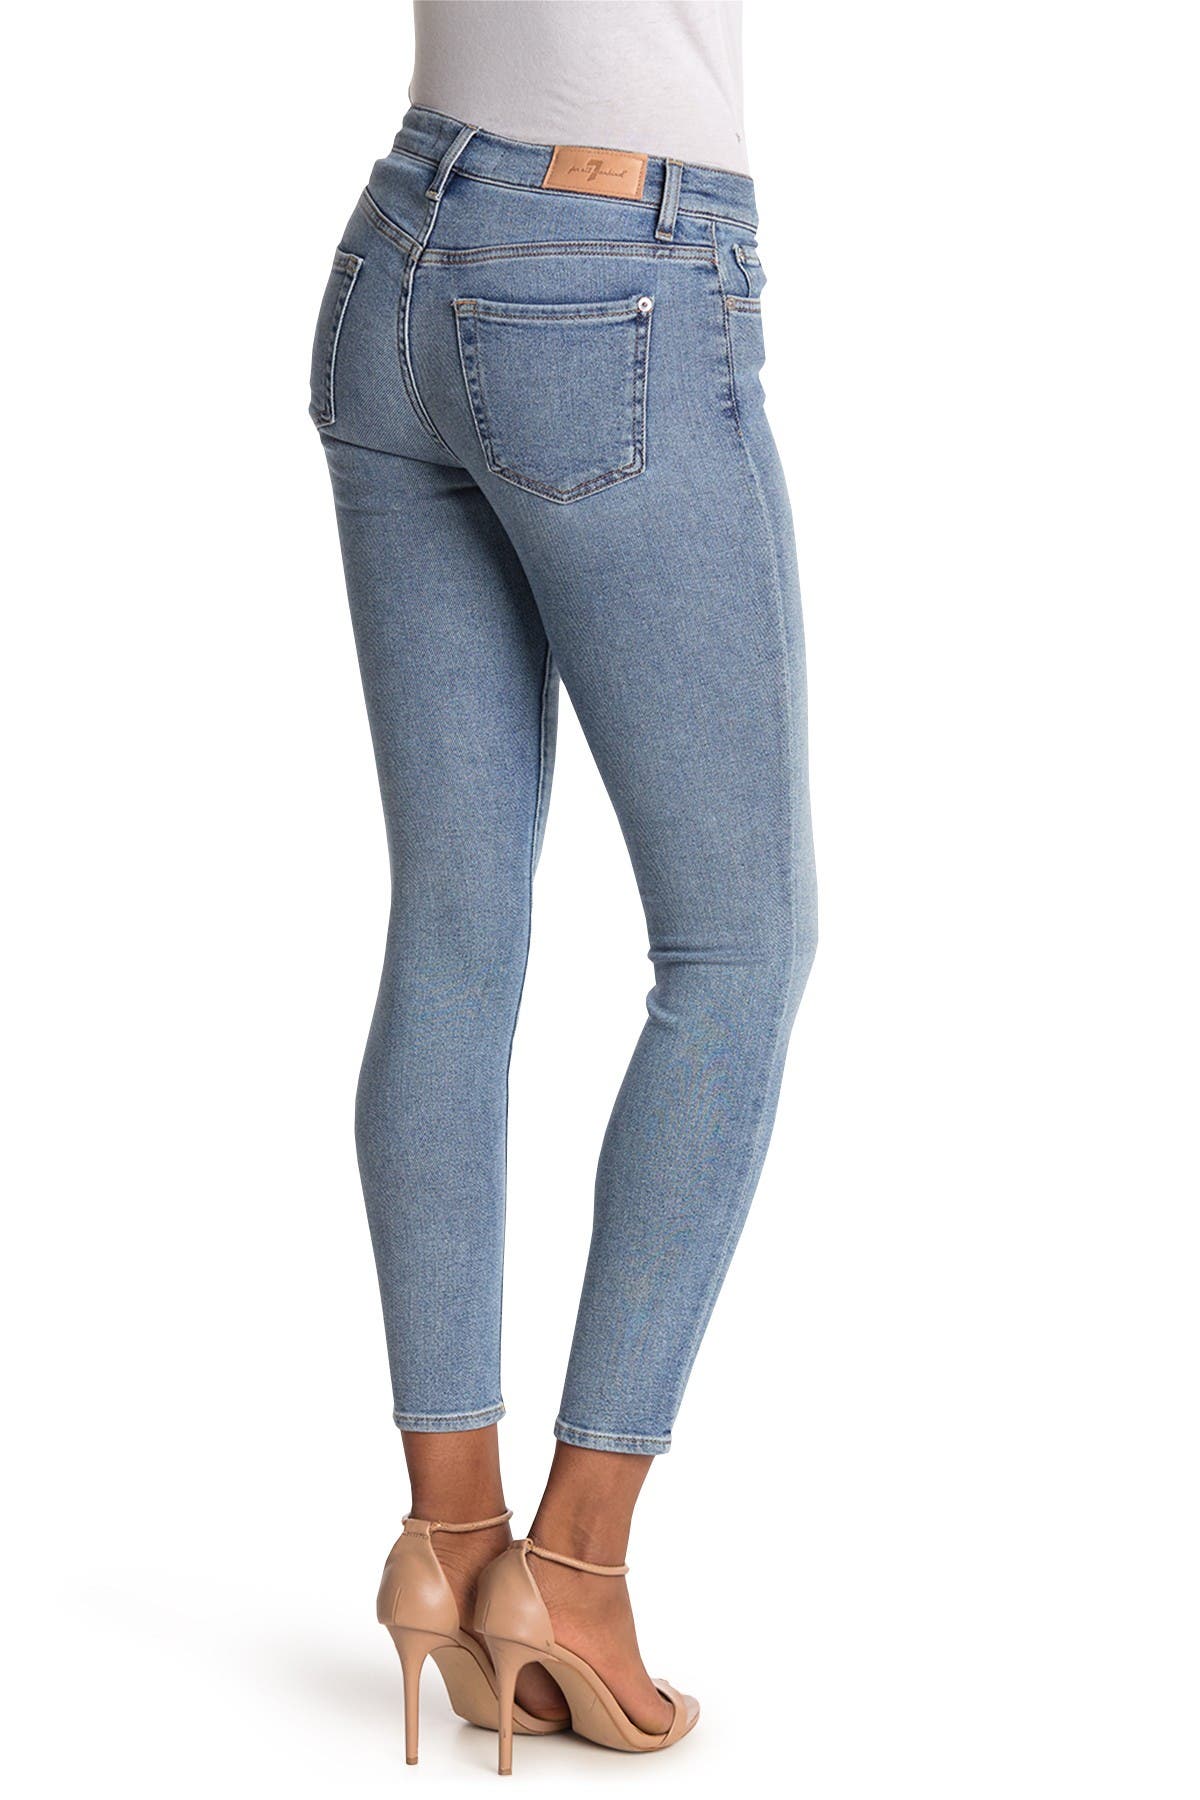 7 For All Mankind | Luxe Vintage The Ankle Skinny Jeans | Nordstrom Rack